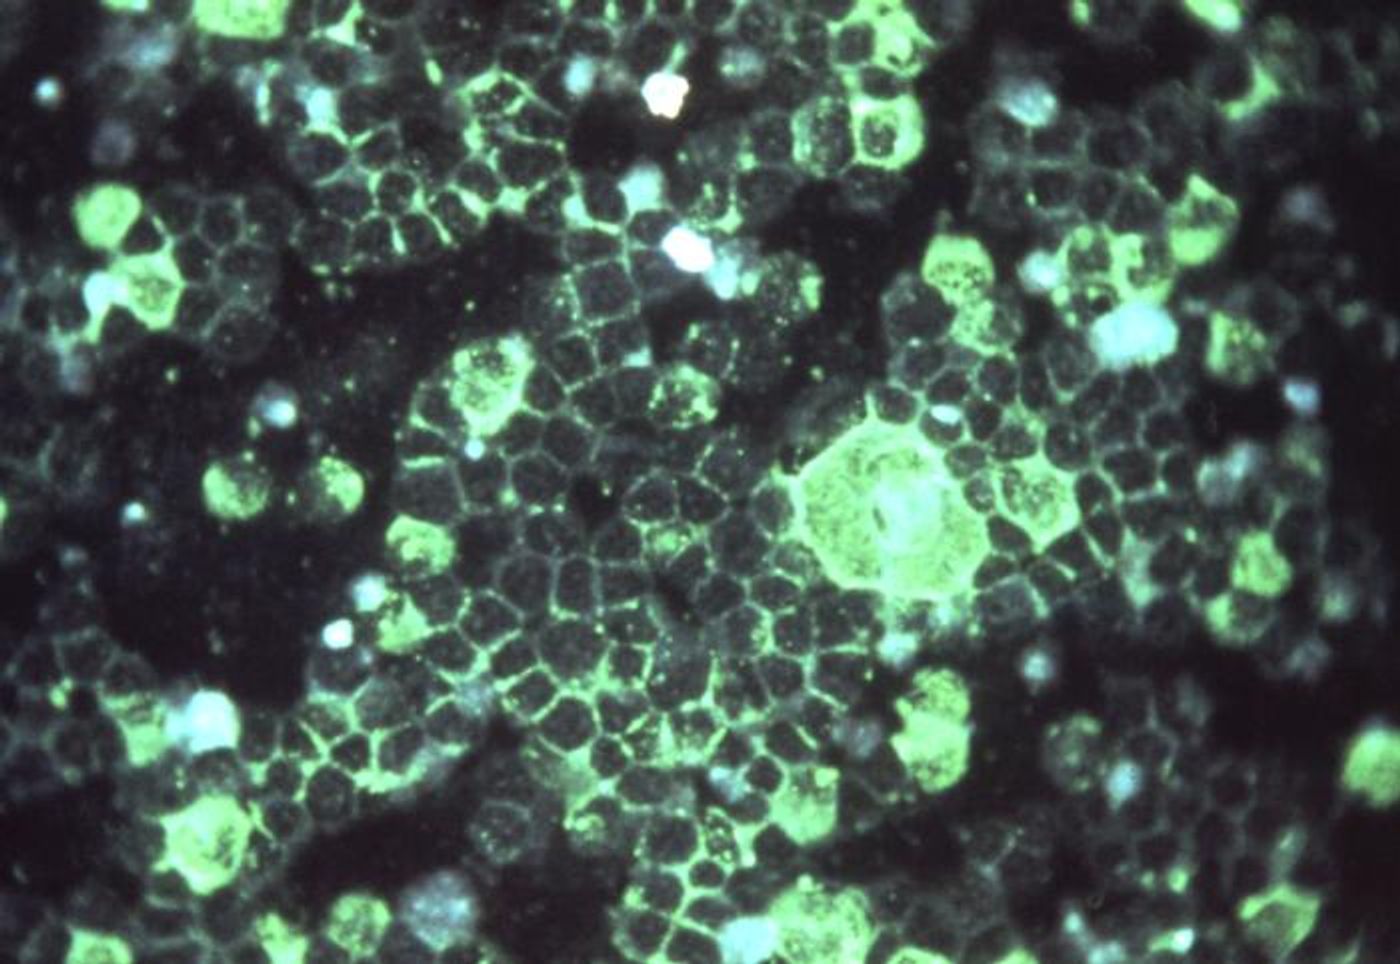 Respiratory syncytial virus (RSV) is seen in a tissue sample. / Credit: CDC/ Dr. Craig Lyerla